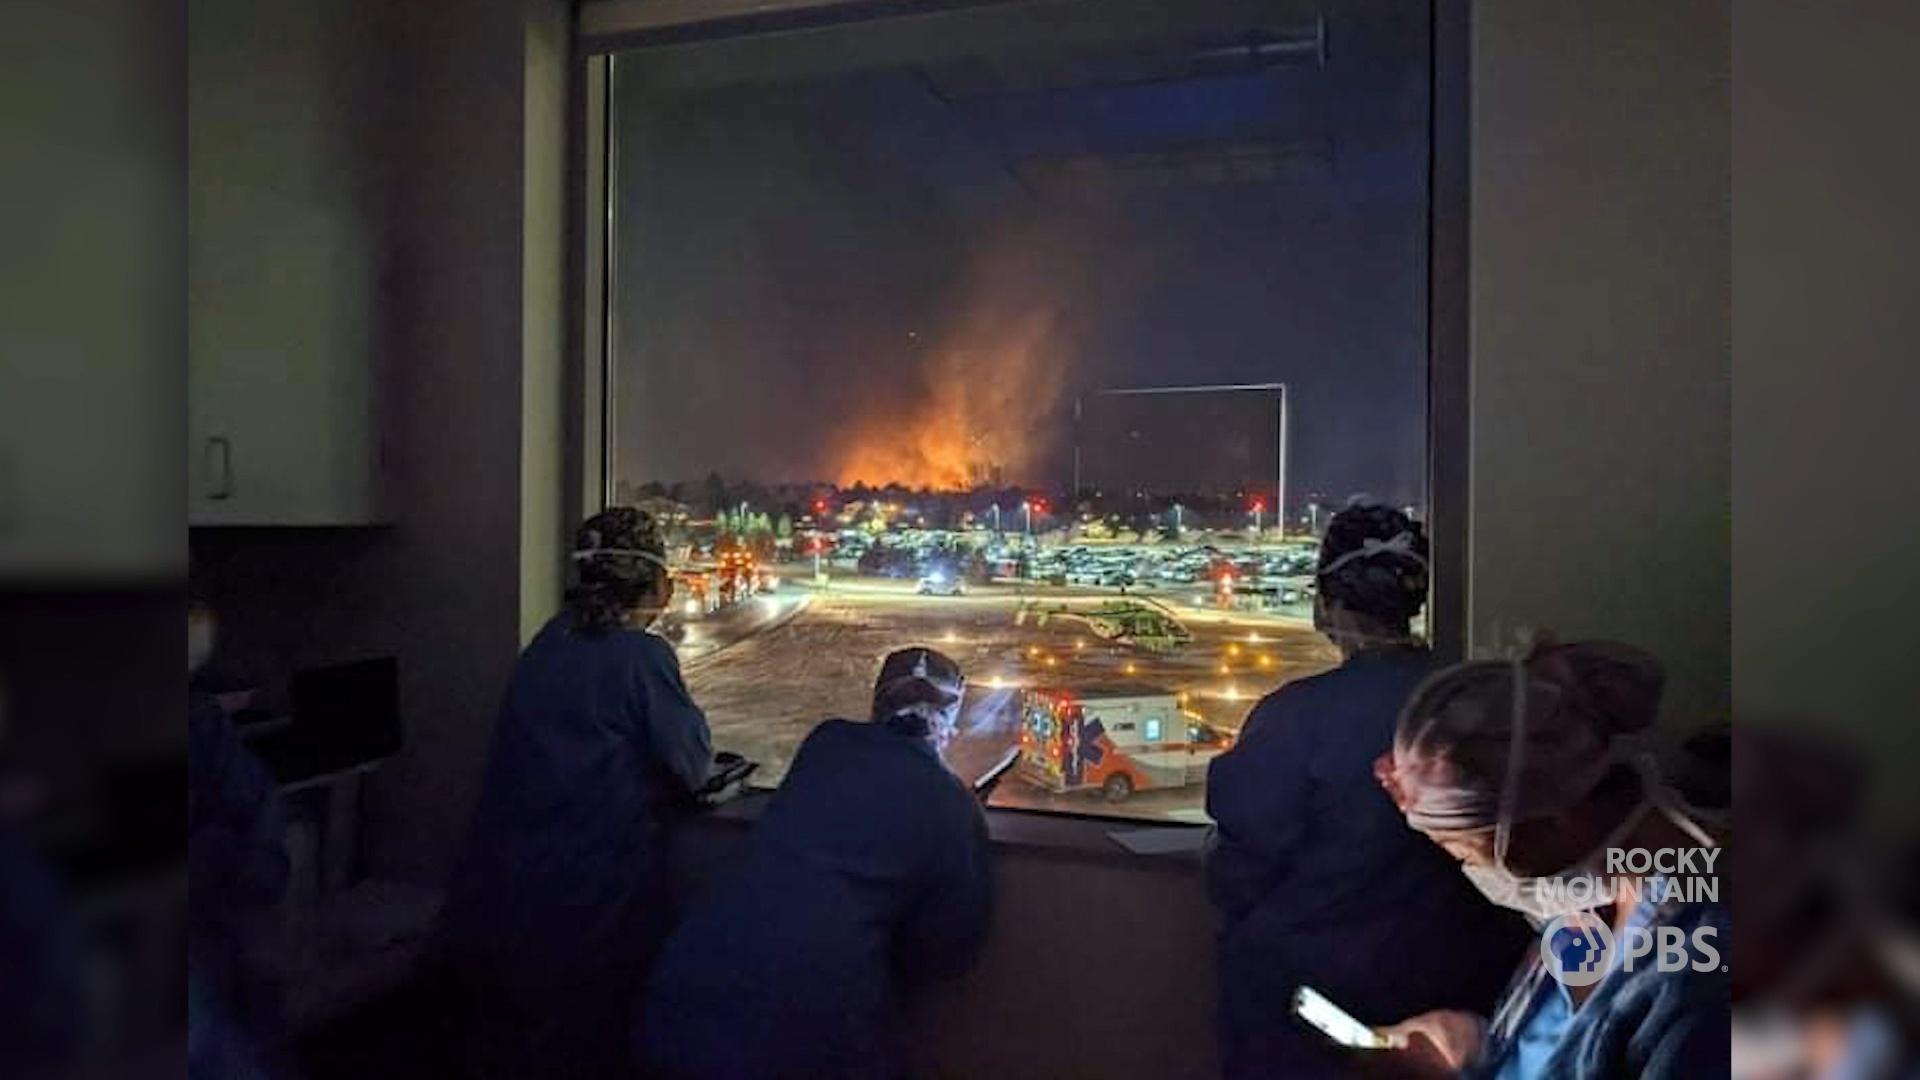 A Colorado nurse captures a haunting image of the Marshall Fire from her hospital's window